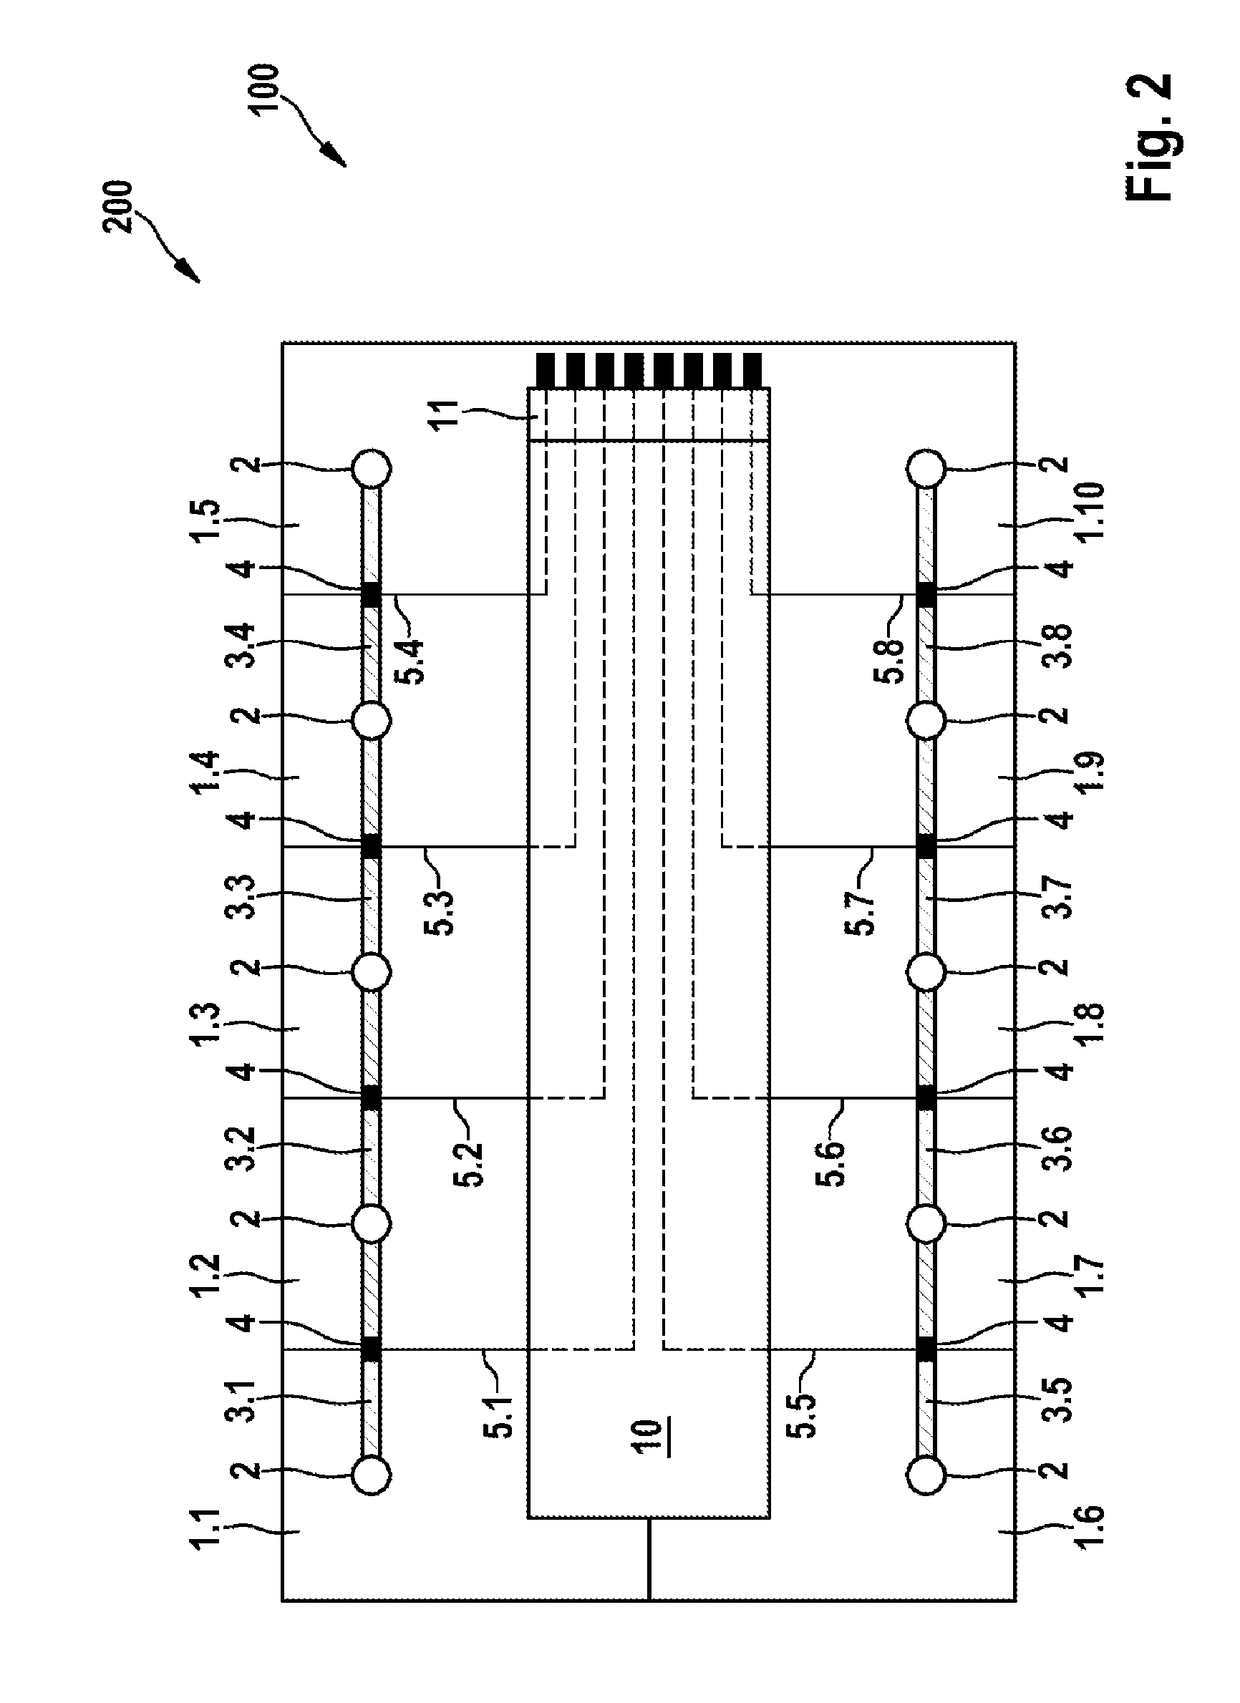 Transmitting device for transmitting electrical signals from at least one galvanic cell to at least one electronic evaluating unit